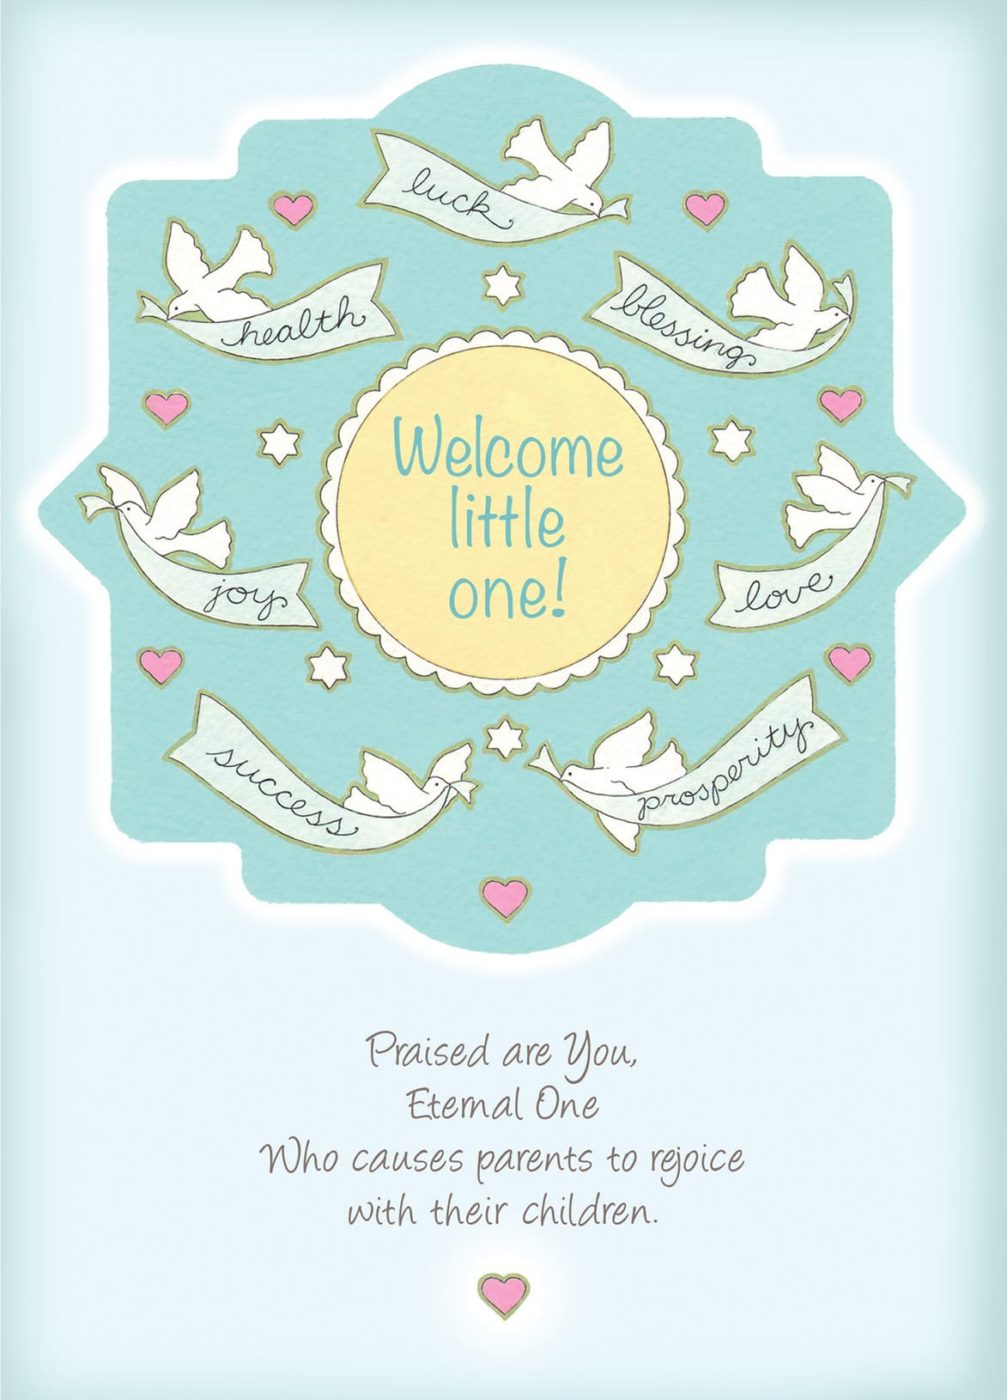 brand new new baby male parents A baby Son greetings card 